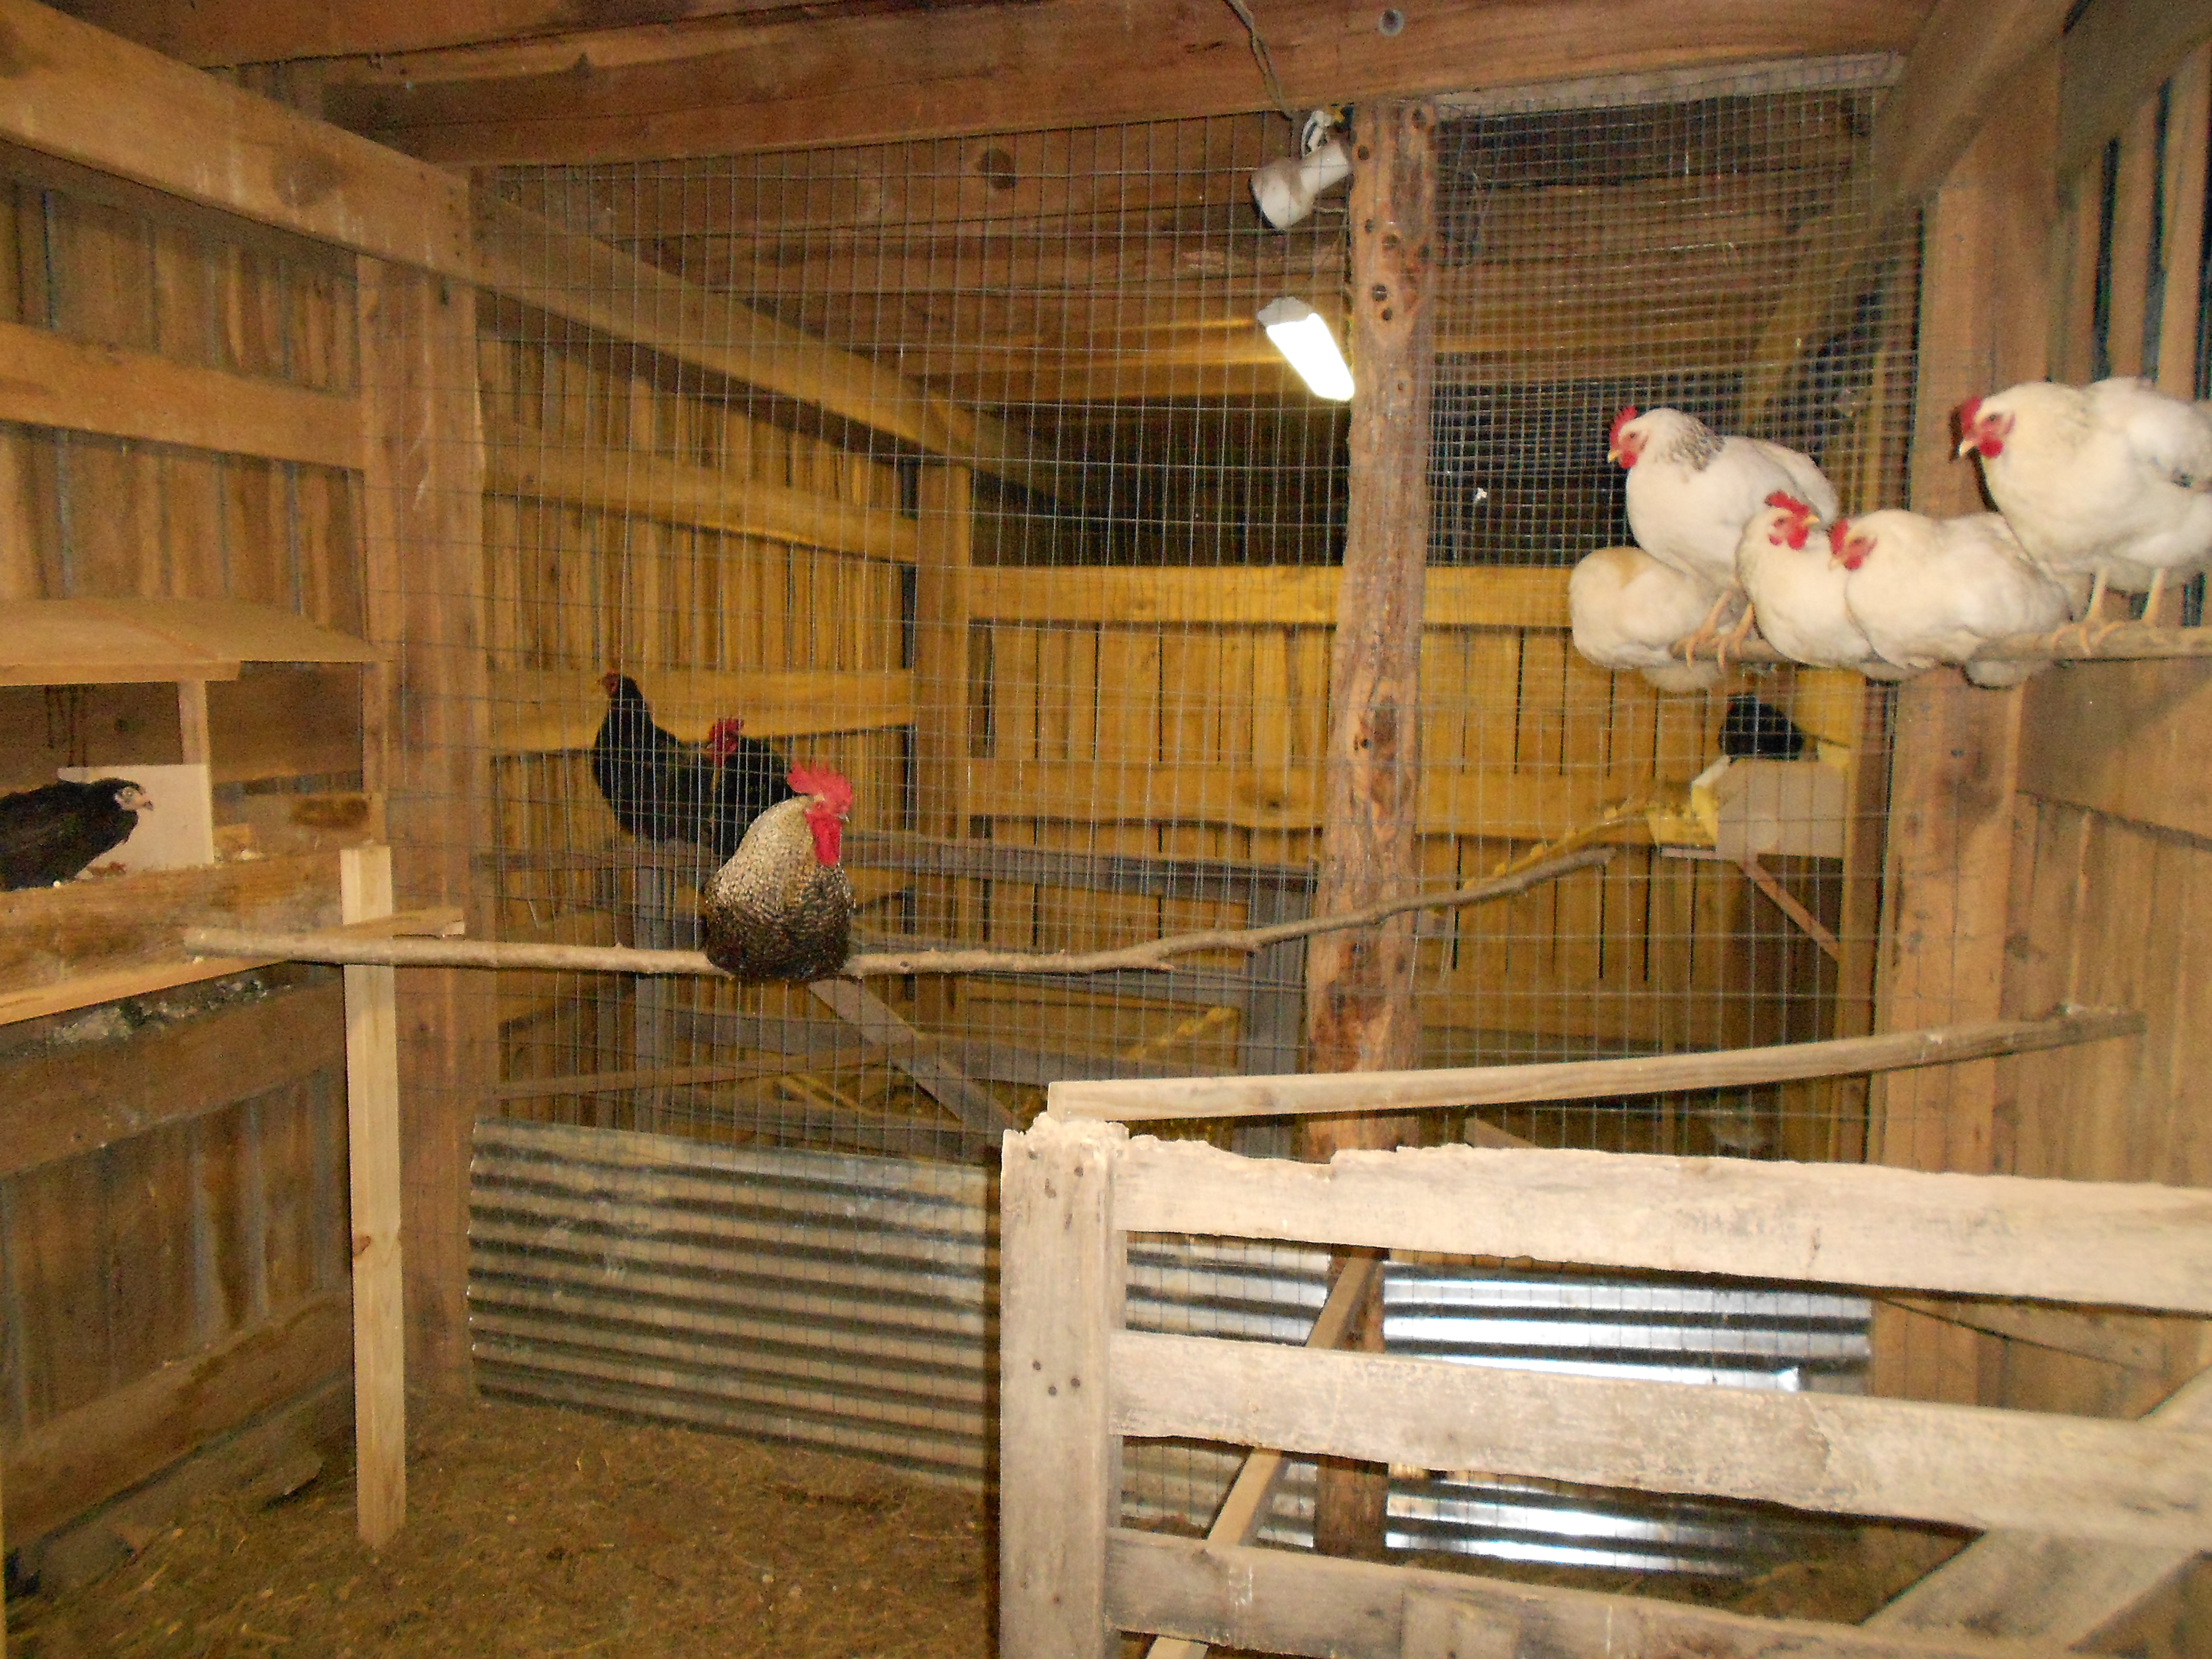 Inside of our coop/barn